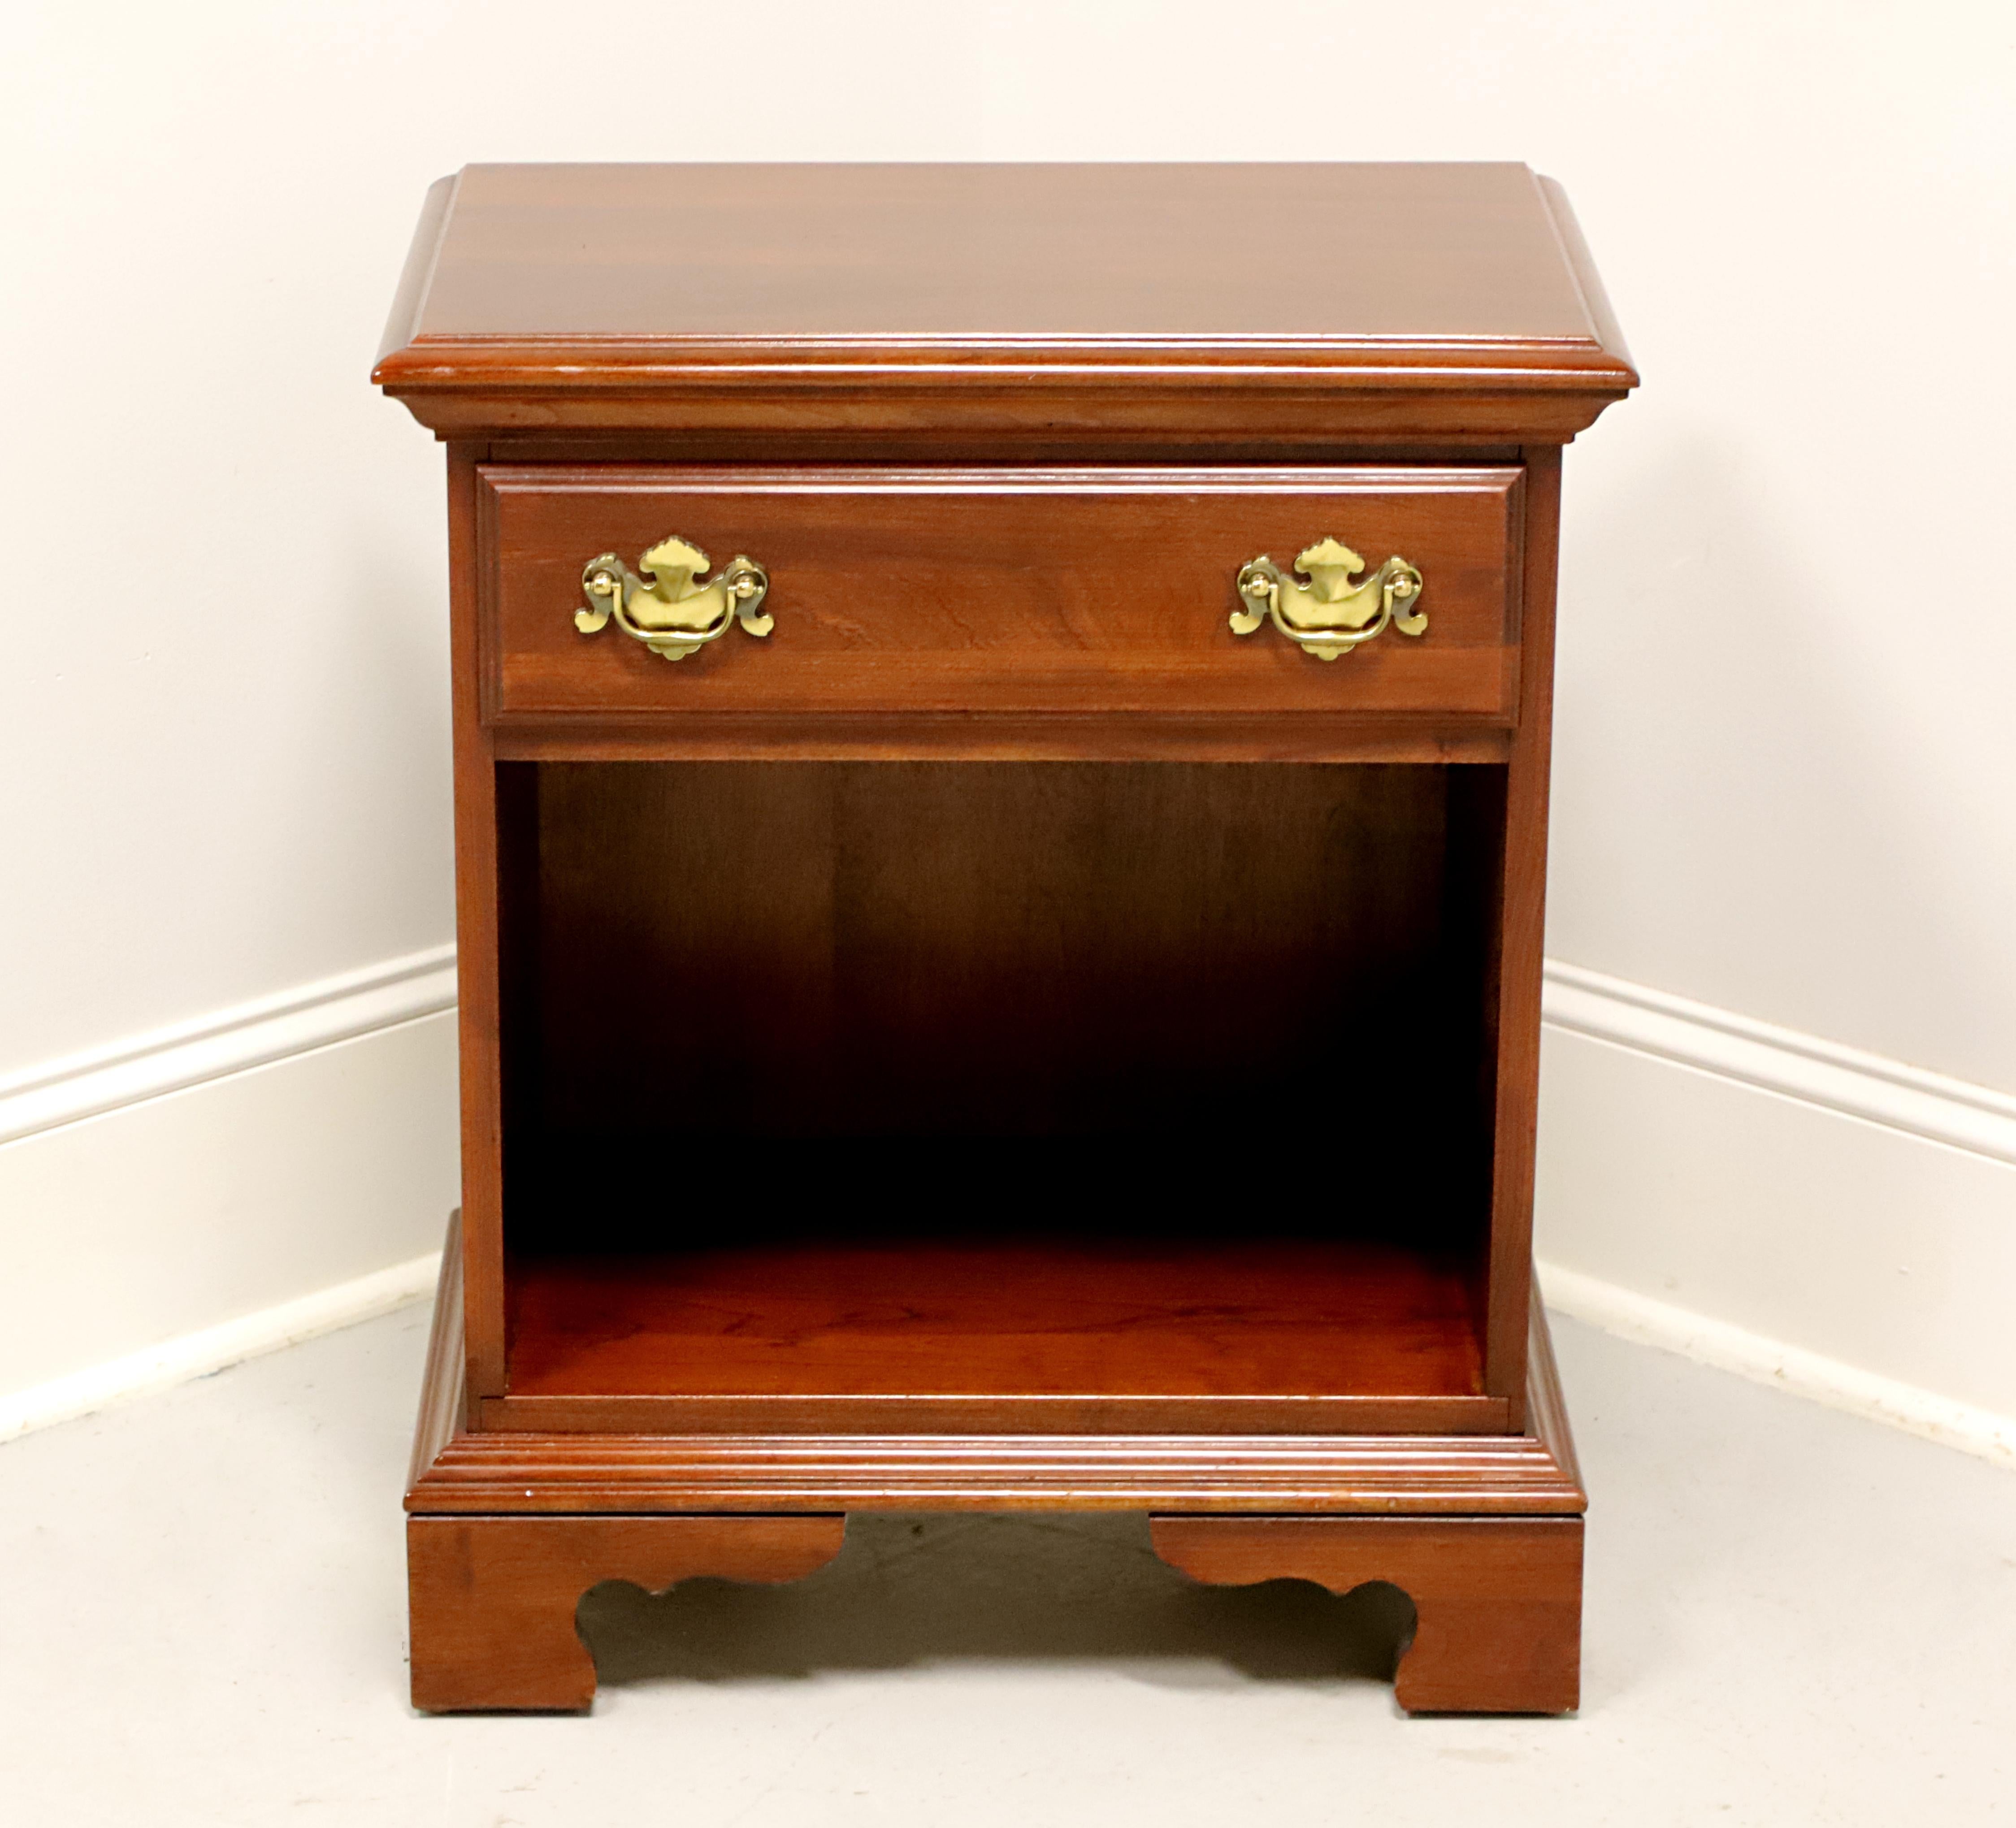 A Chippendale style bedside chest by Jamestown Sterling. Cherry with brass hardware, ogee edge to the top, and bracket feet. Features one drawer of dovetail construction over an open shelf storage area. Made in the USA, in the late 20th